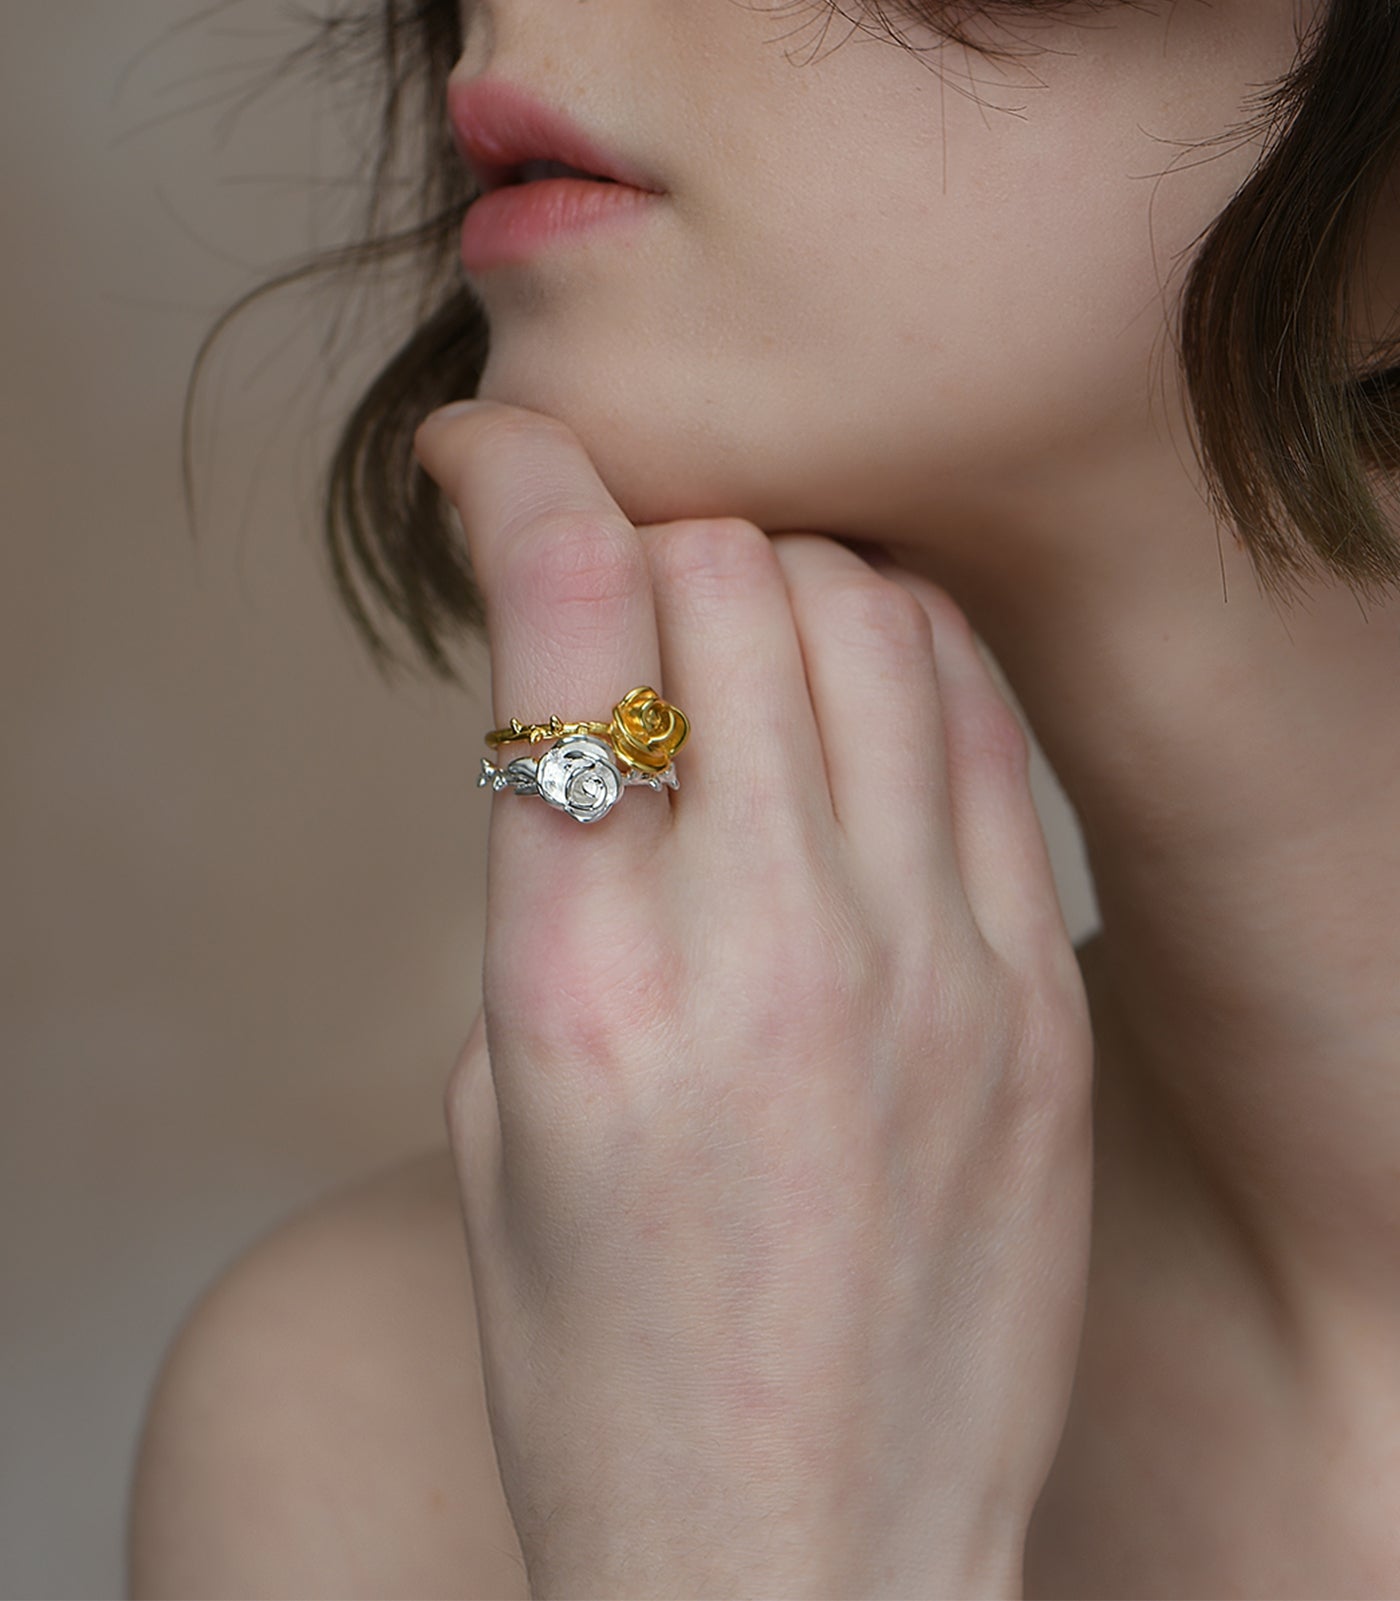 A model wears a gold vermeil ring with a thorn detail on the band. The ring also has a rose feature on the top of the band.